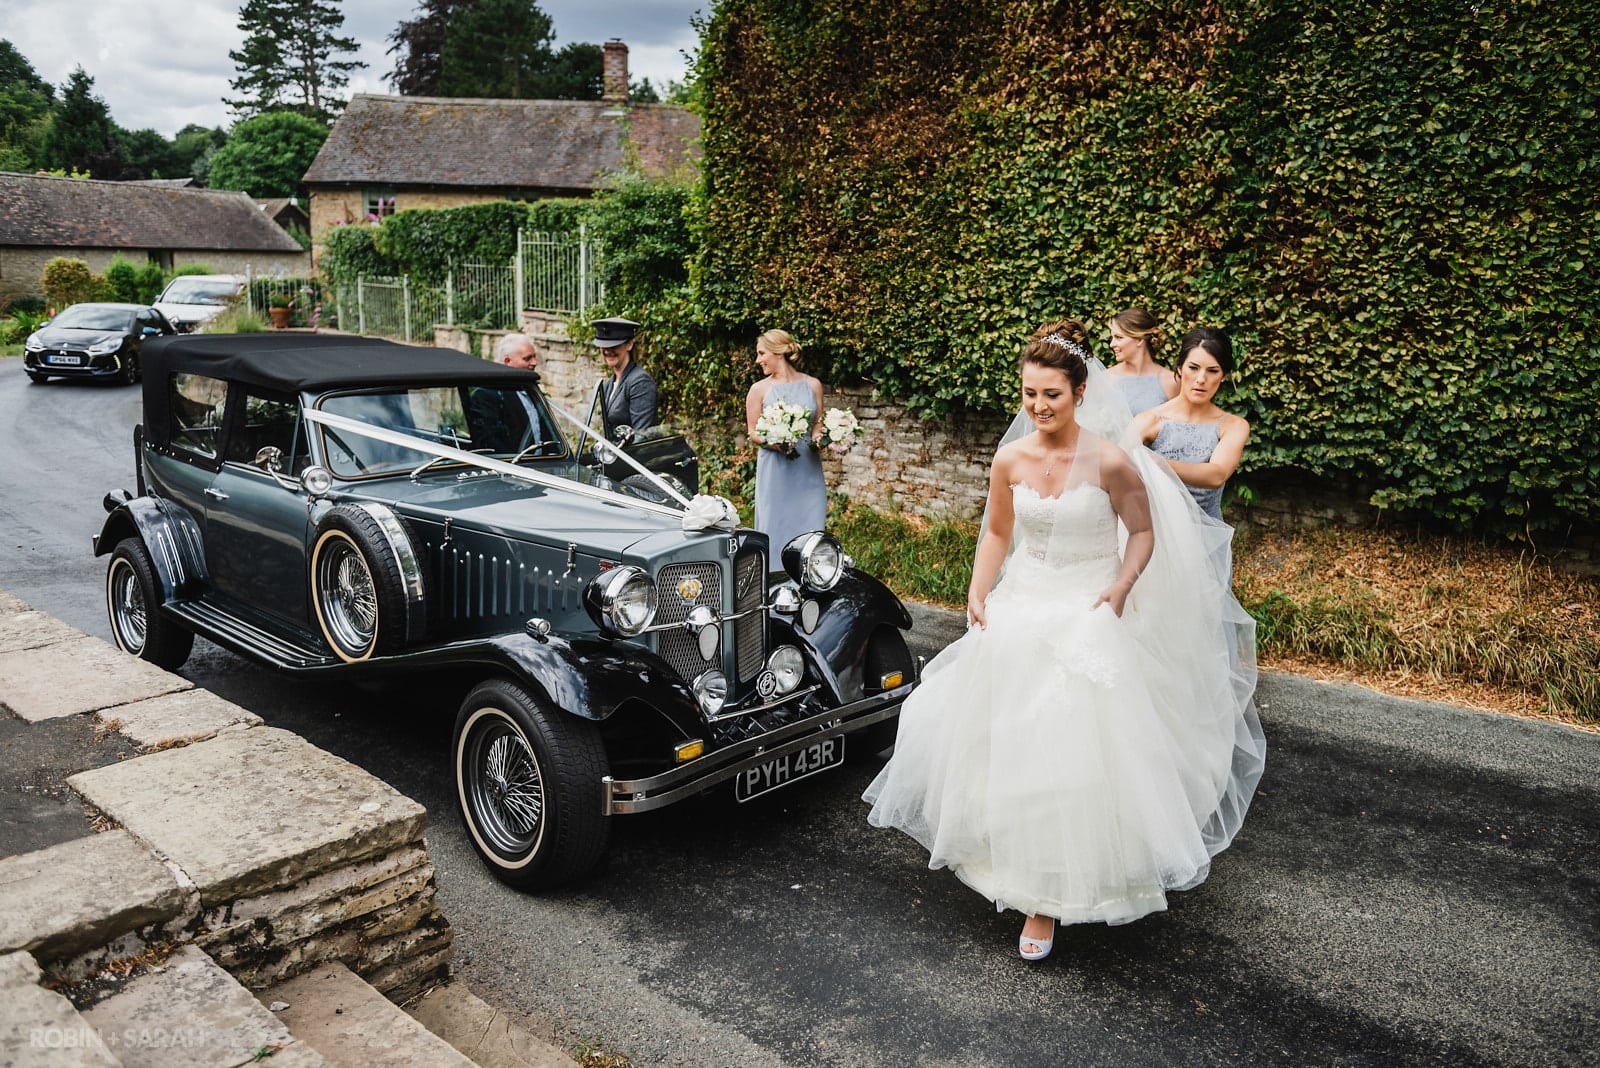 Bride walks from wedding car to church as bridesmaids help her with dress and veil